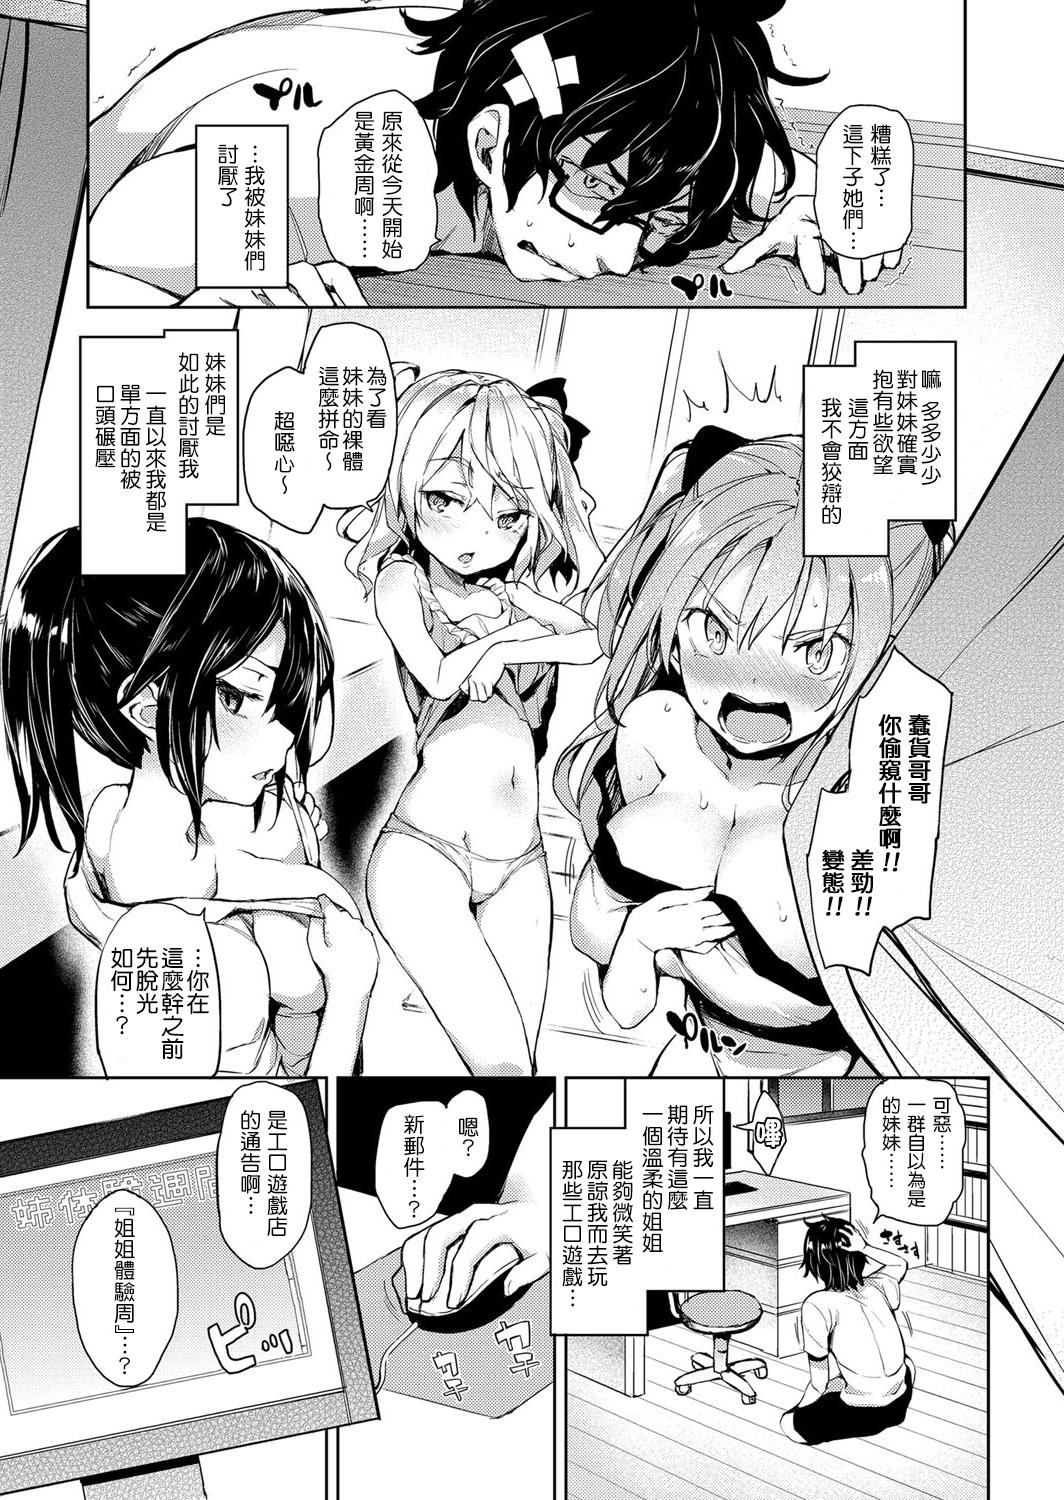 Riding 姉体驗週間 1-5 First - Page 3